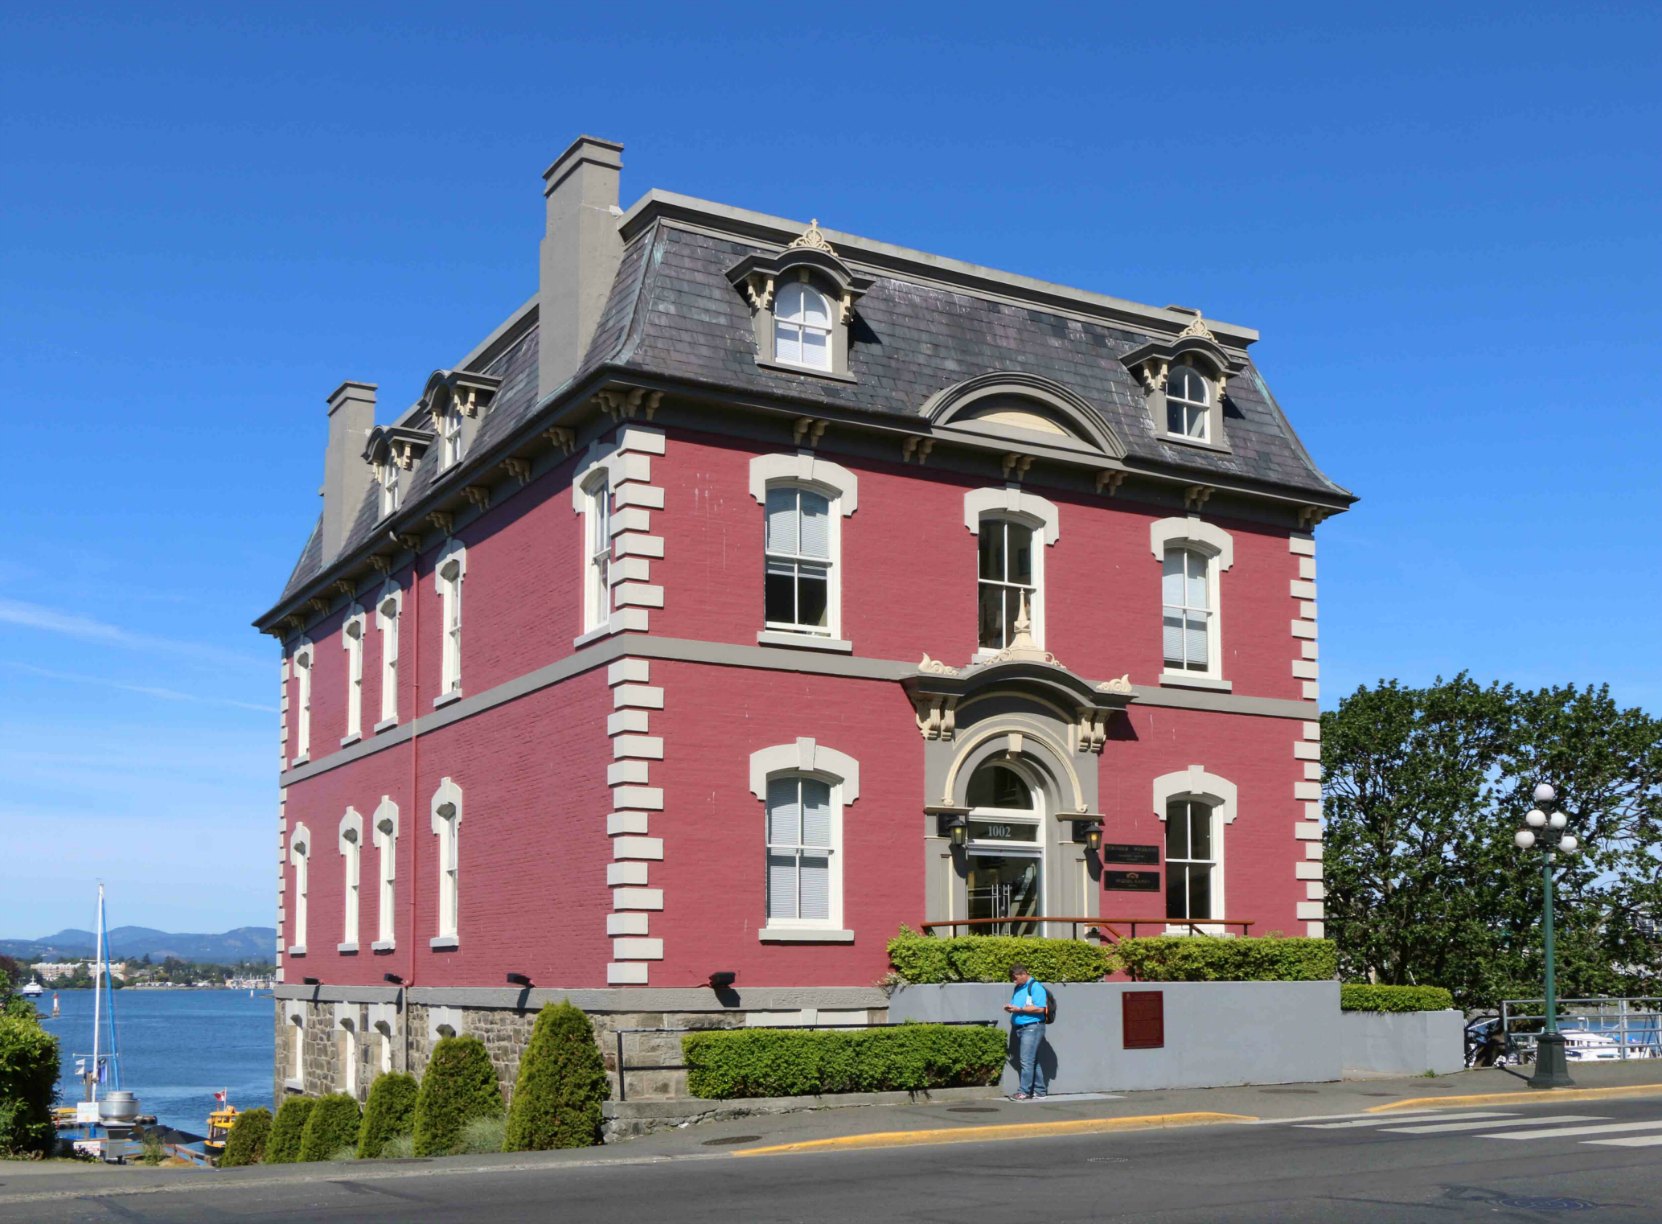 The Customs House, 1002 Wharf Street, built in 1874-75. (photo by Victoria Online Sightseeing Tours)